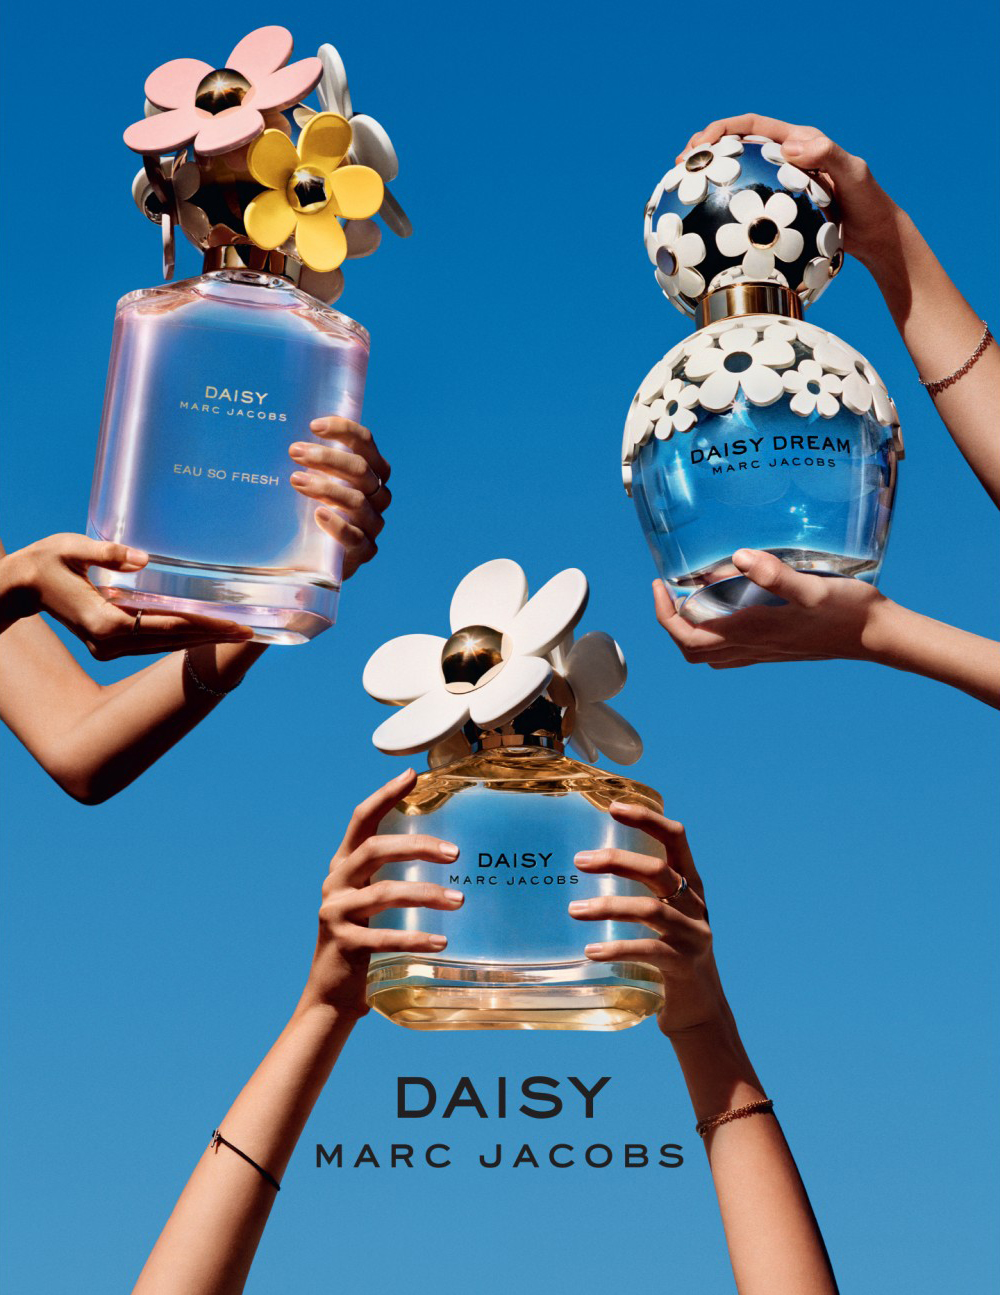 Marc Jacobs' Daisy Fragrance Spring 2017 Ad Campaign with Kaia Gerber